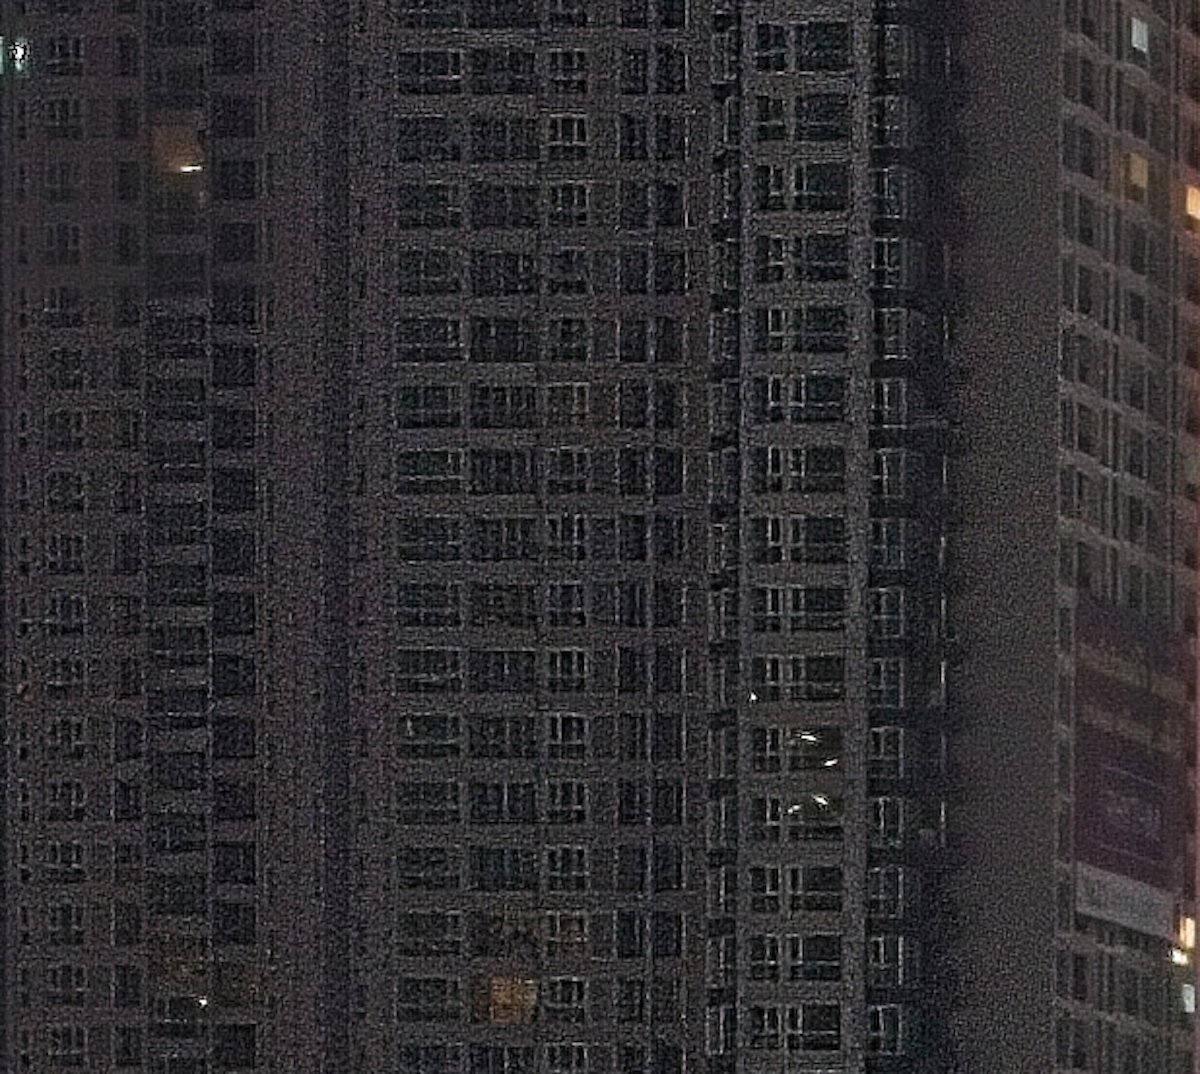 Close-up of sharpened photo of city building with pixelation and noise